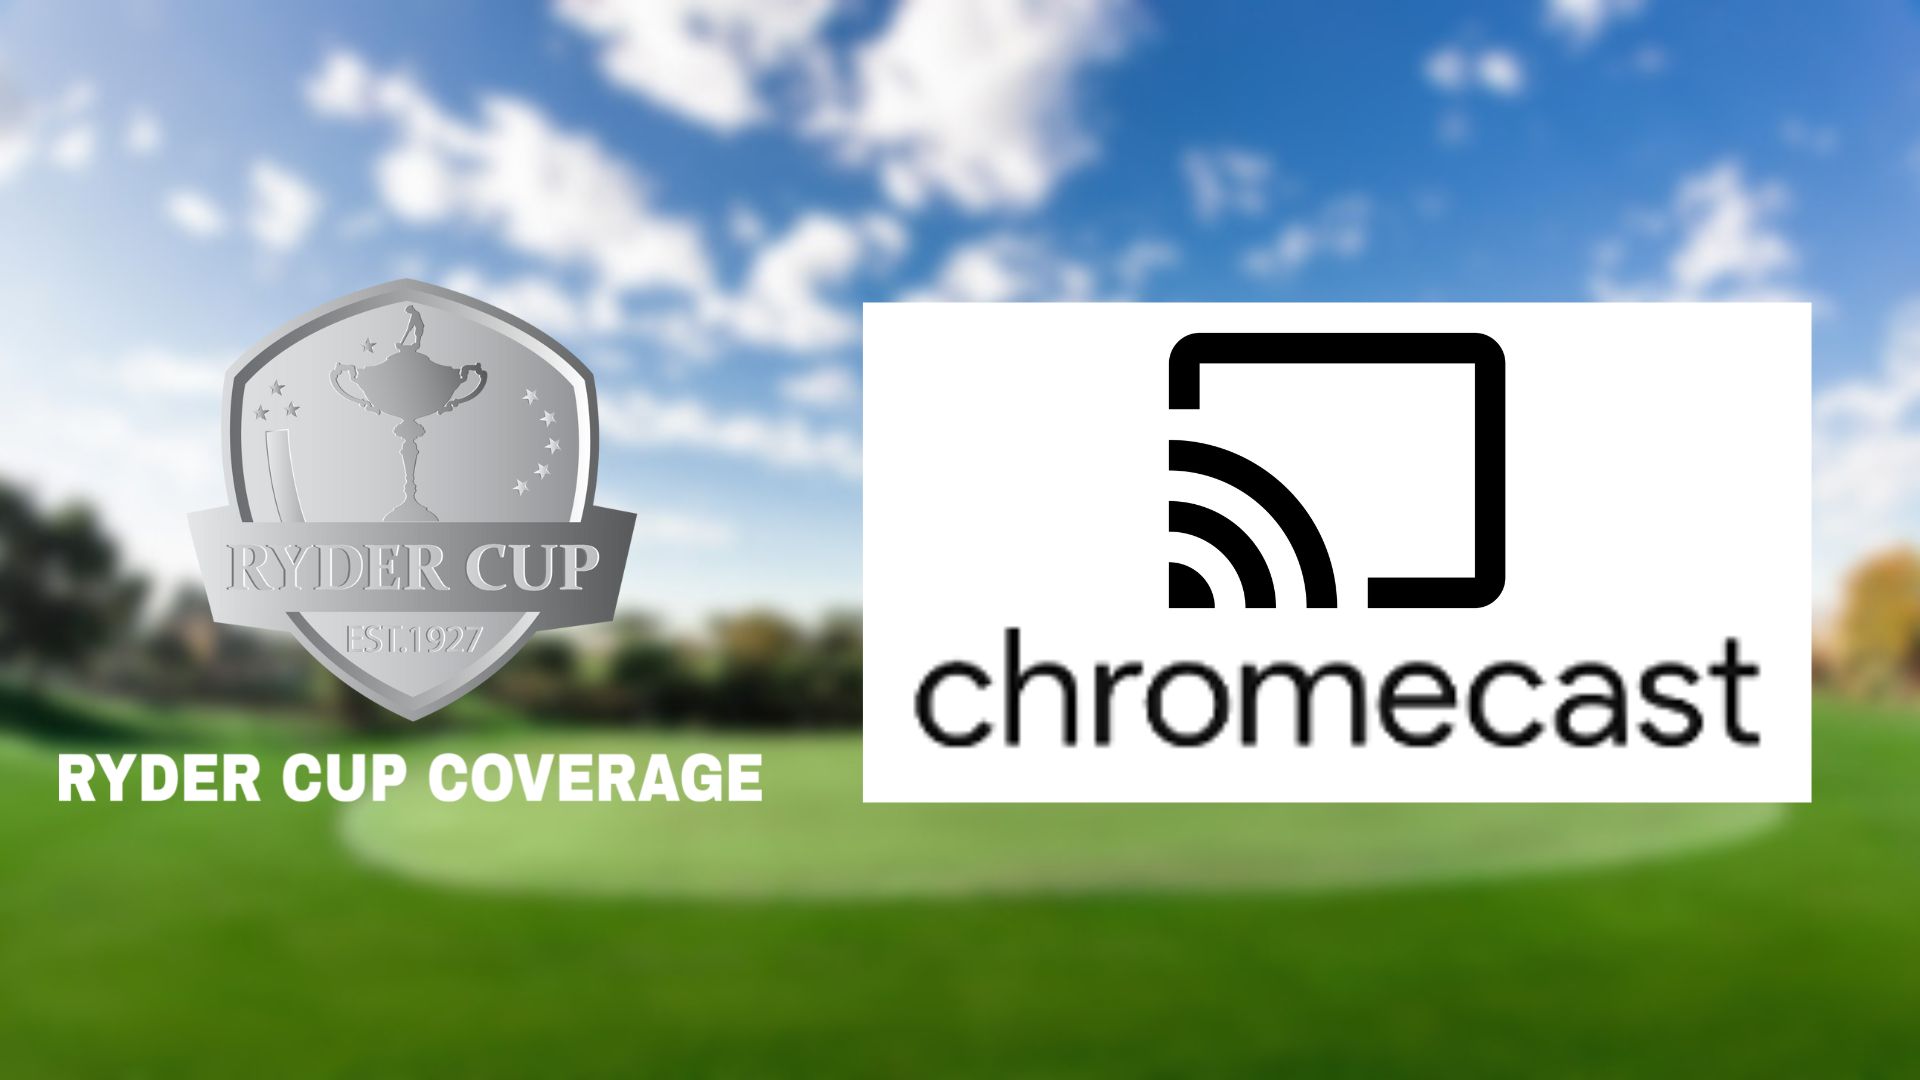 How to Watch Ryder Cup 2023 on Chromecast